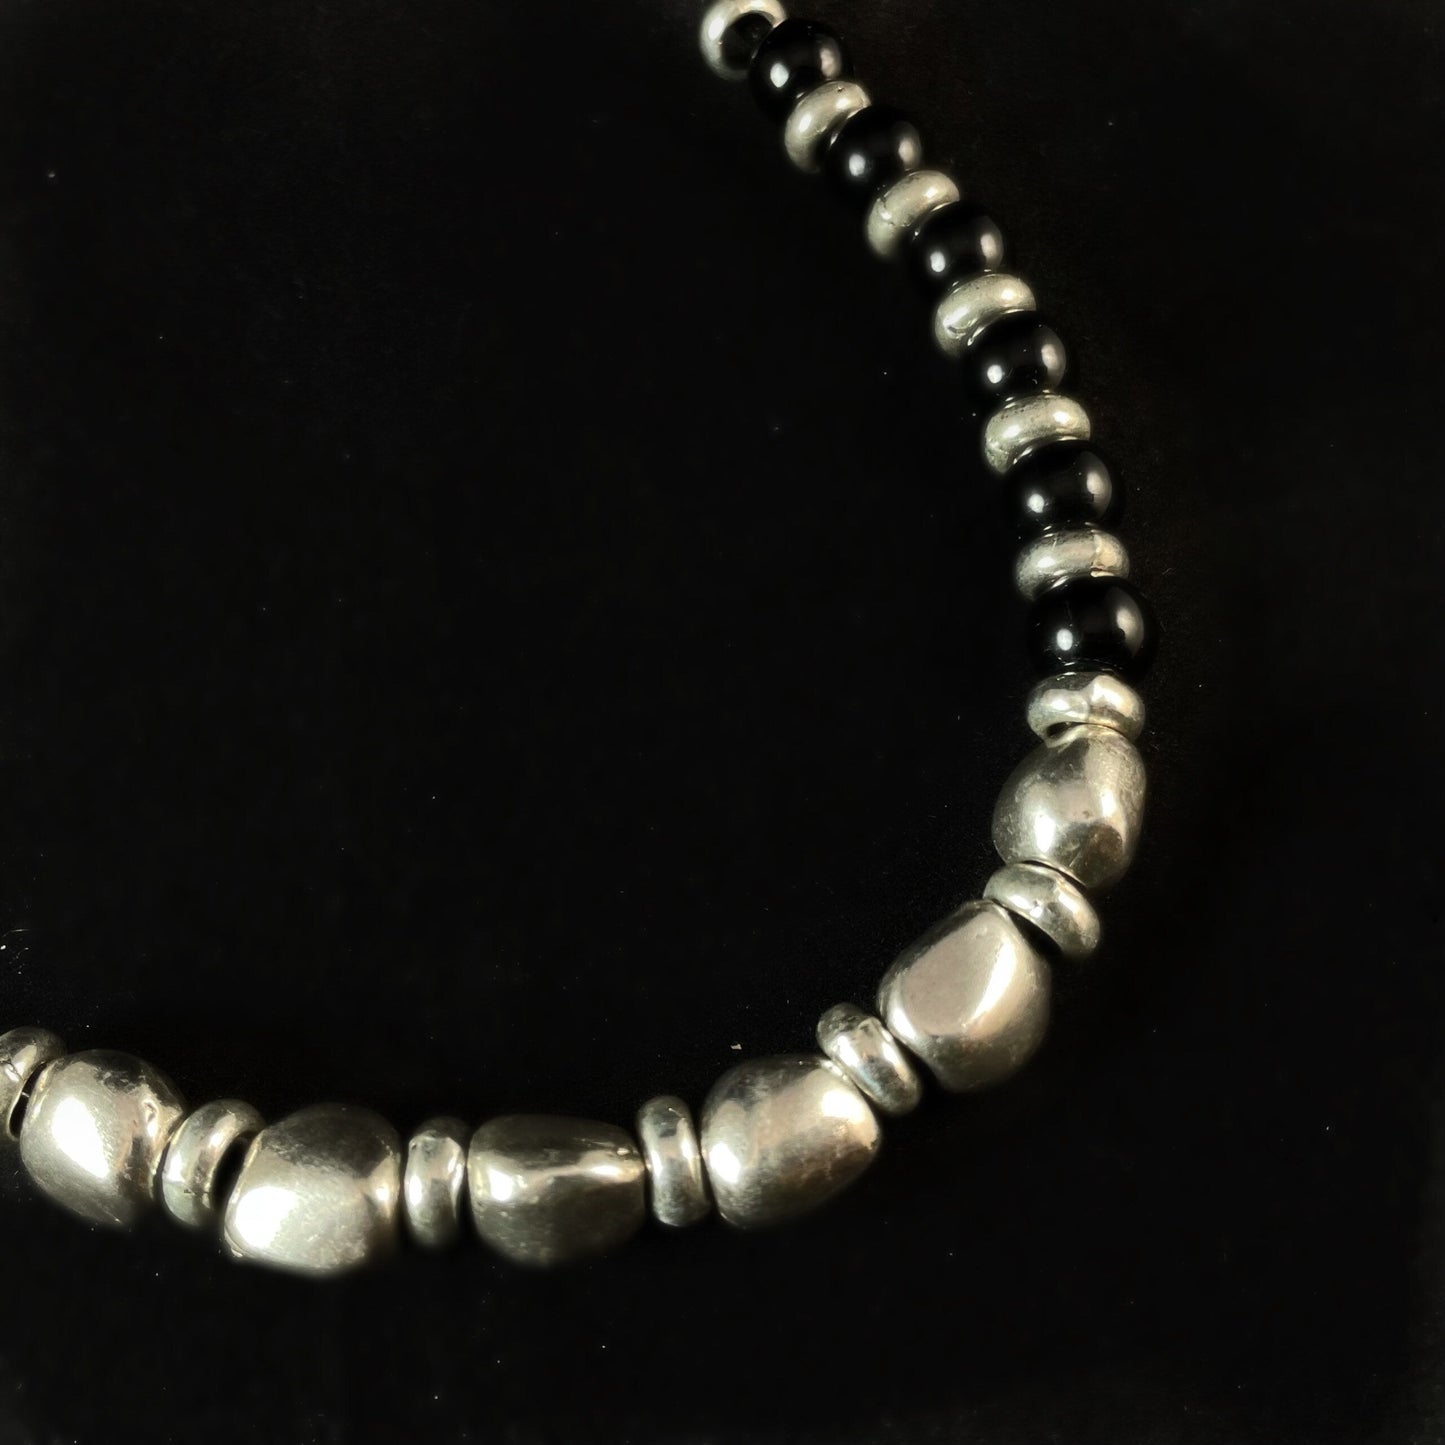 Silver and Black Beaded, Leather Cord Necklace - Handmade in Spain